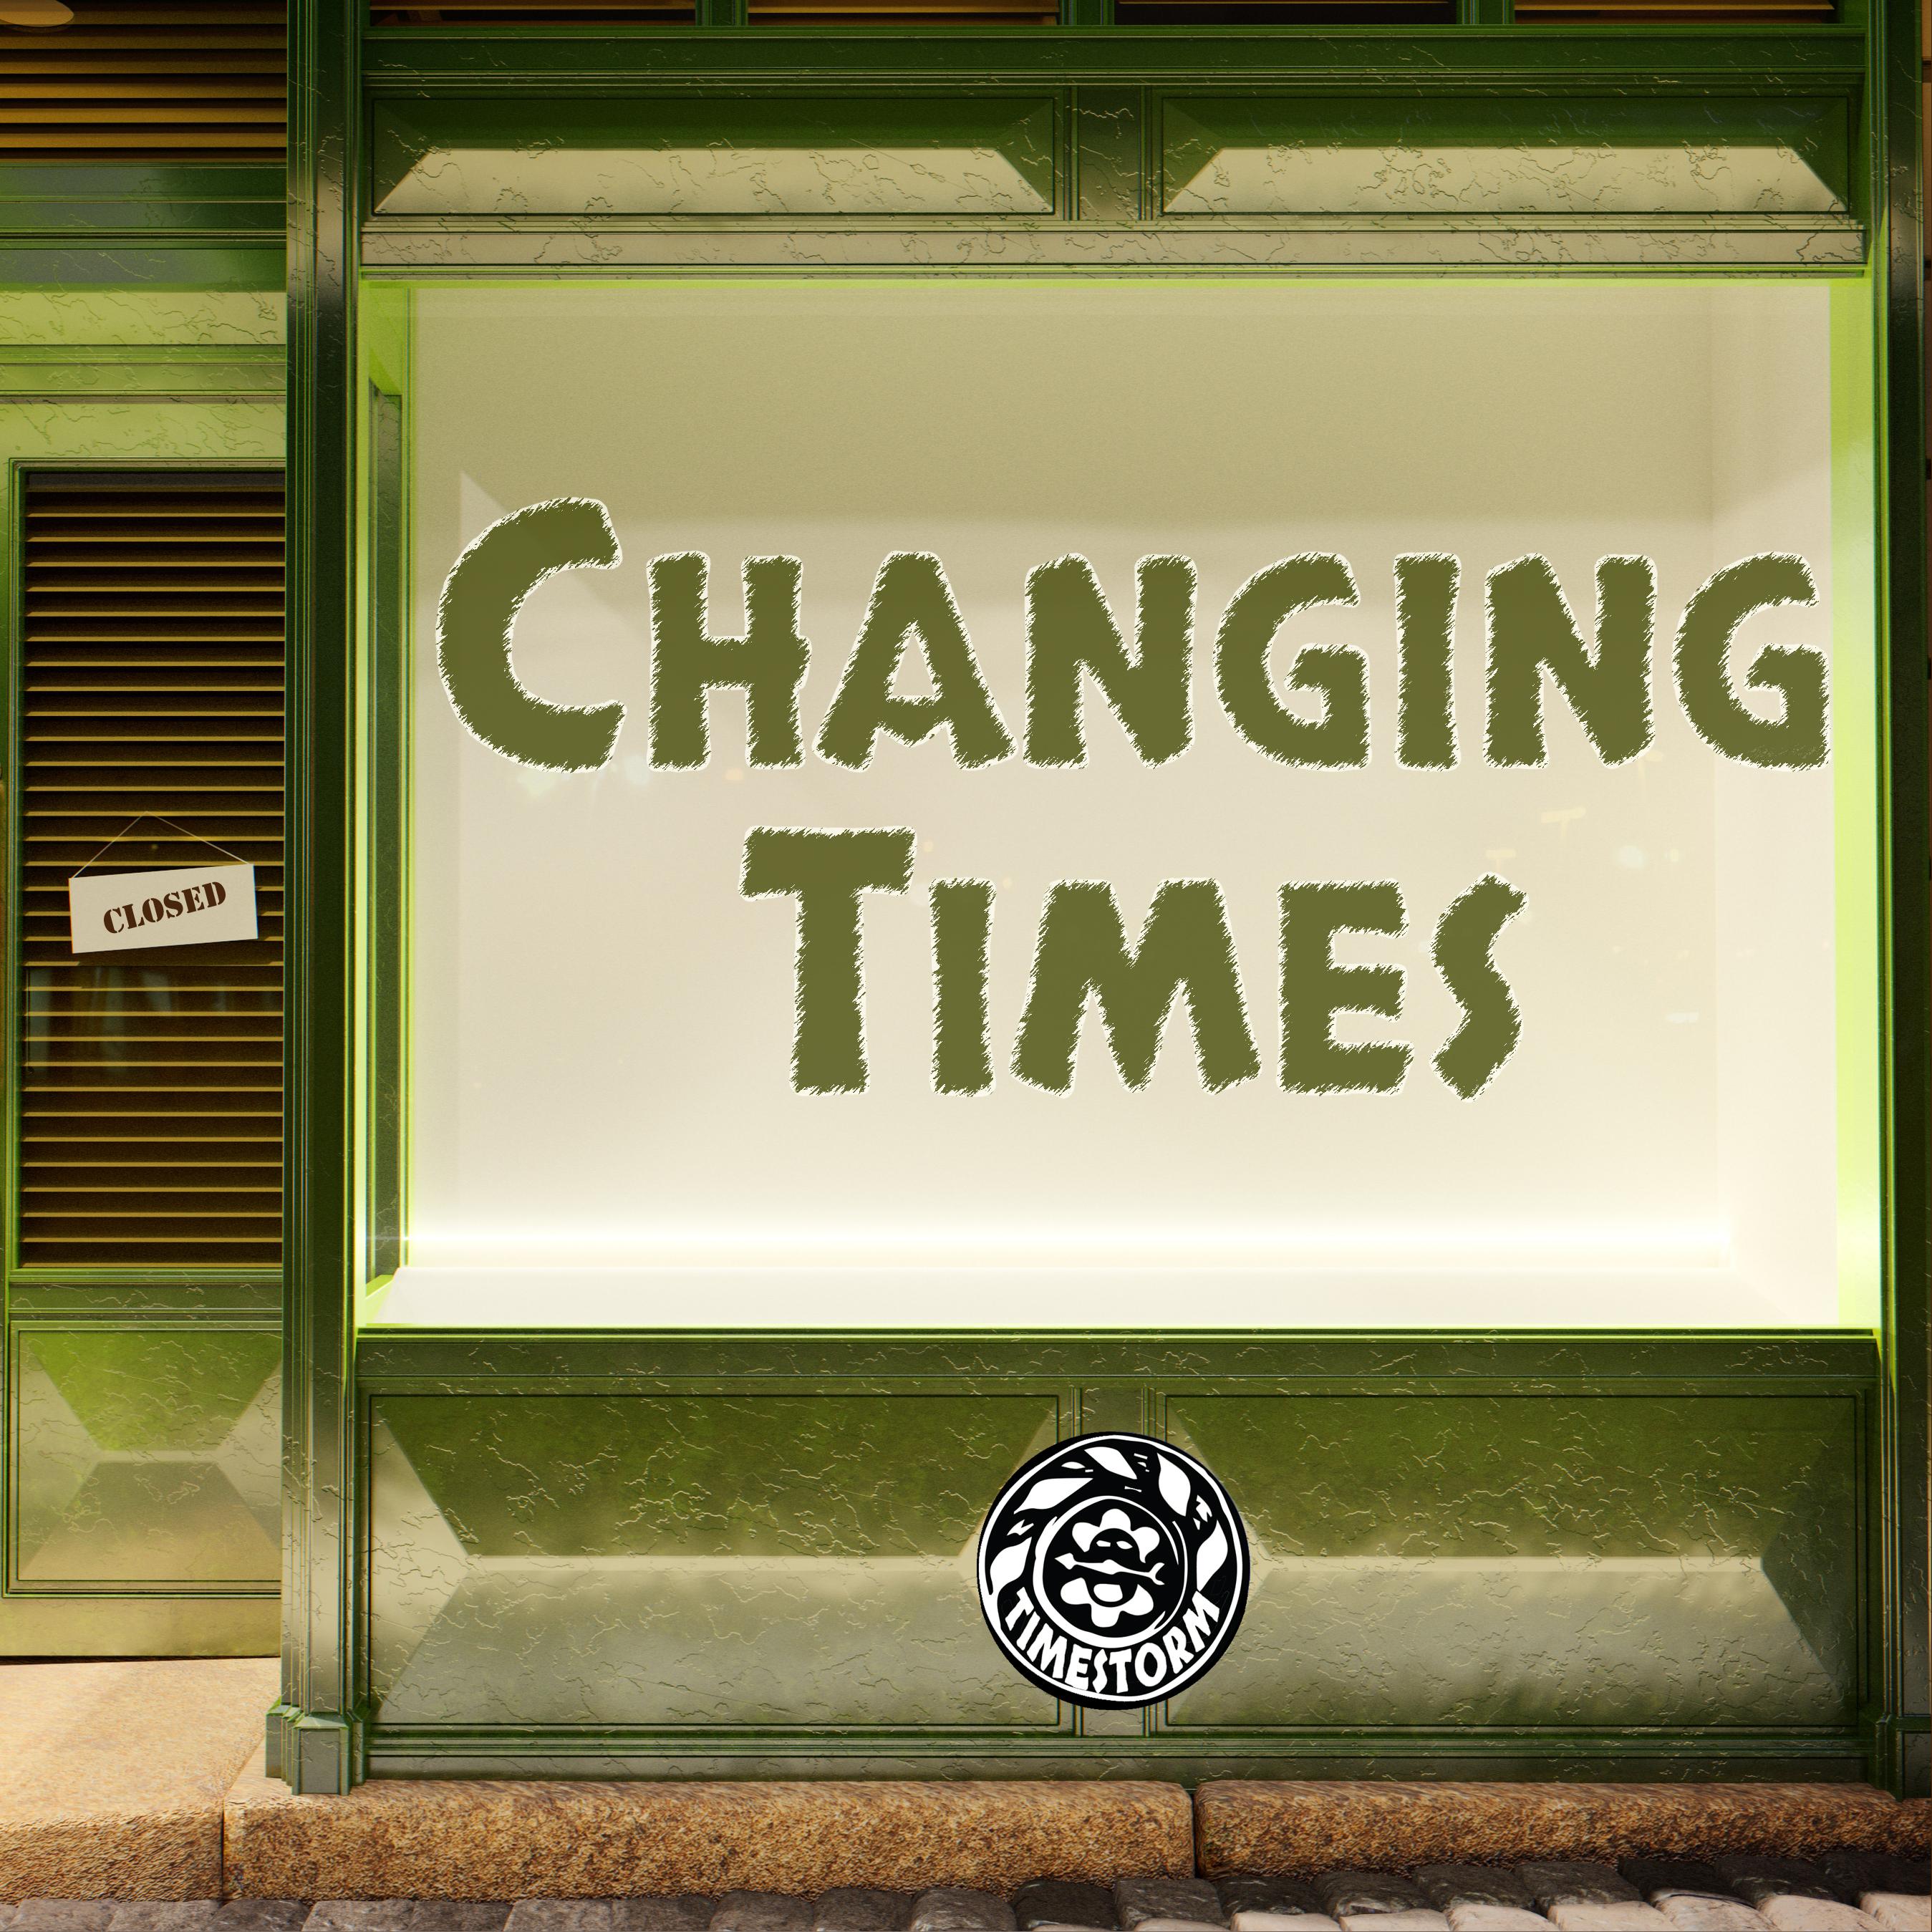 Thumbnail for "Episode 8: Changing Times".